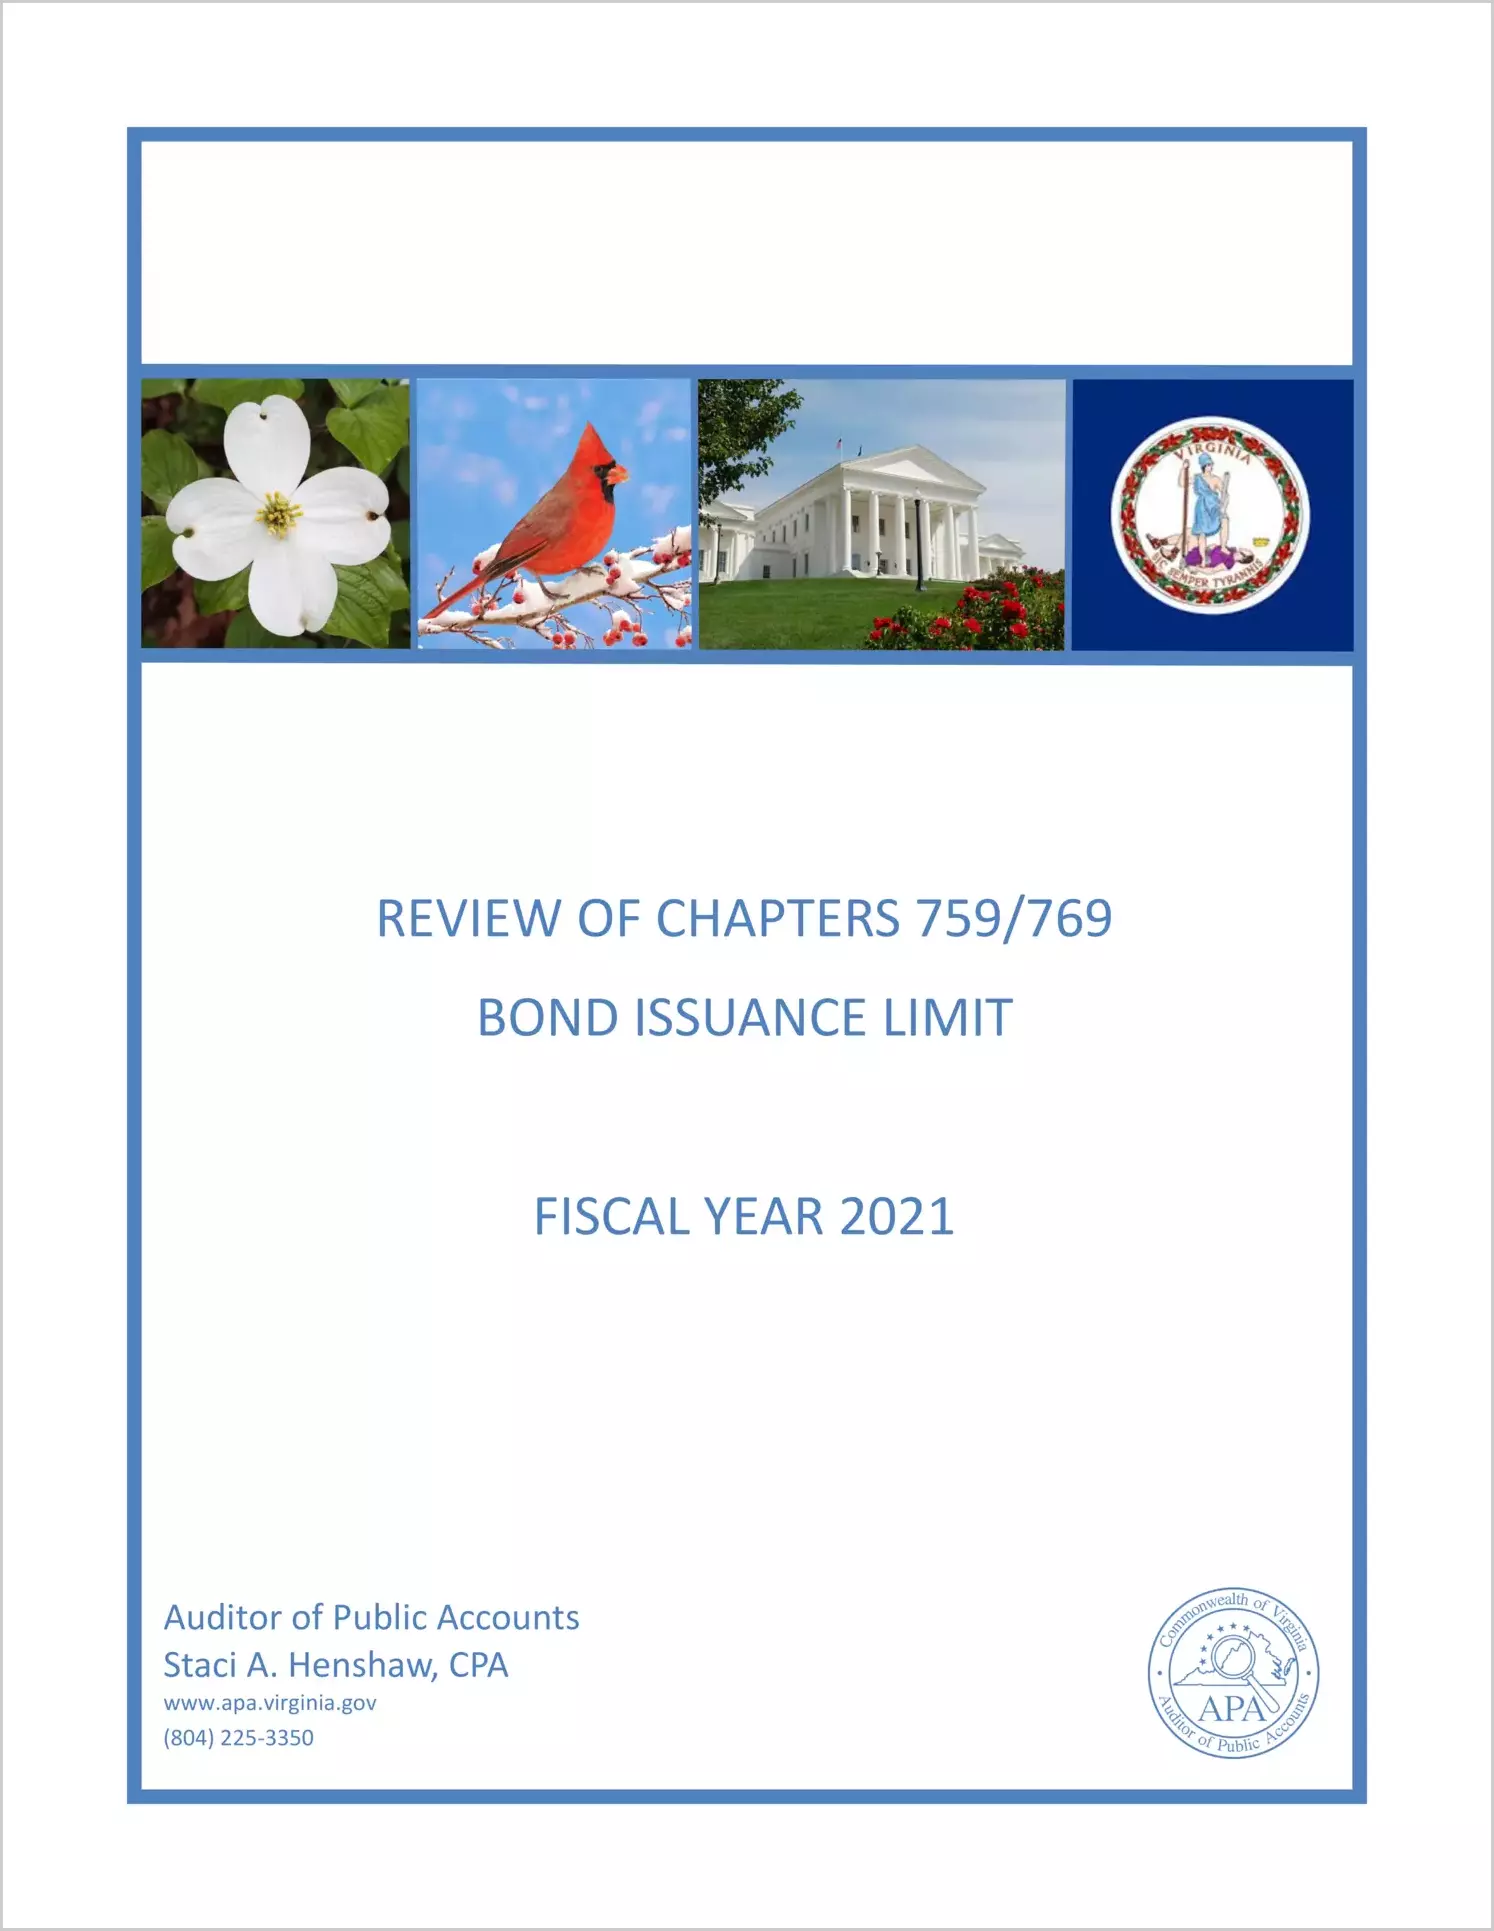 Review of Chapters 759_769 Bond Issuance Limit for the Fiscal Year 2021